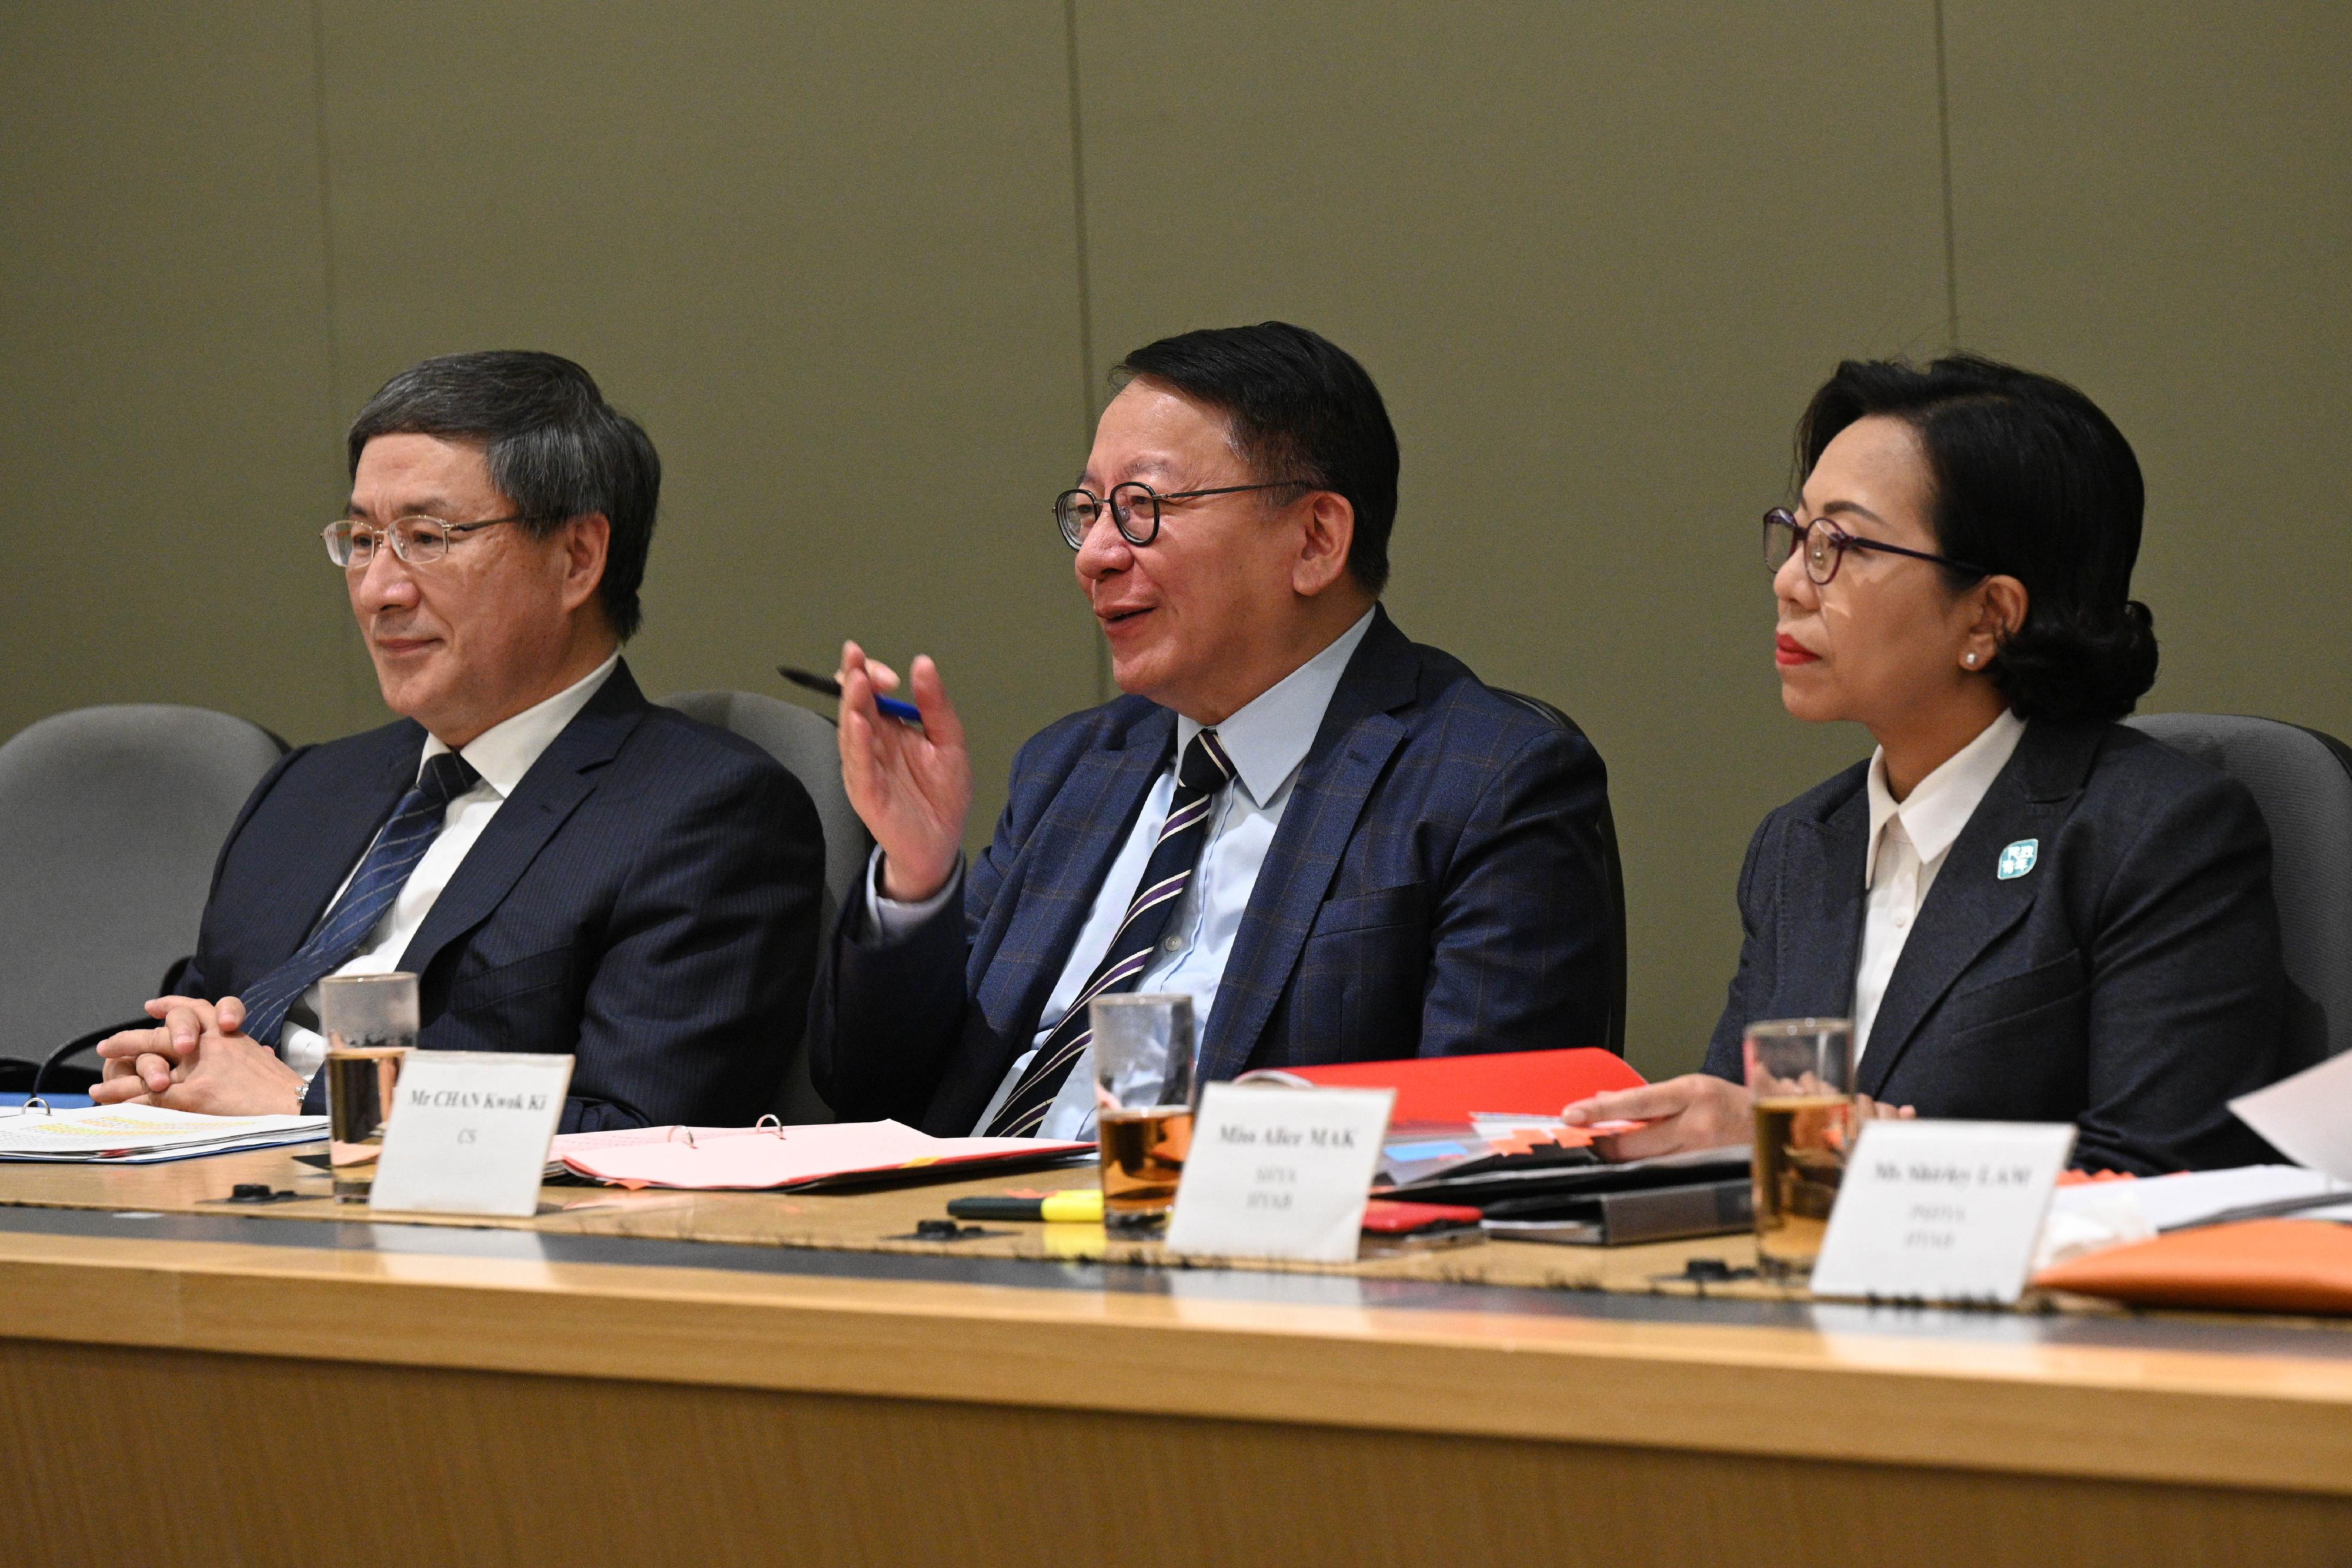 The Steering Committee on District Governance, chaired by the Chief Secretary for Administration, Mr Chan Kwok-ki, held its first meeting this afternoon (July 12). Photo shows Mr Chan (centre); the Deputy Chief Secretary for Administration, Mr Cheuk Wing-hing (left); and the Secretary for Home and Youth Affairs, Miss Alice Mak (right), exchanging views with other committee members on district work at the meeting to formulate corresponding policy initiatives of district governance. 